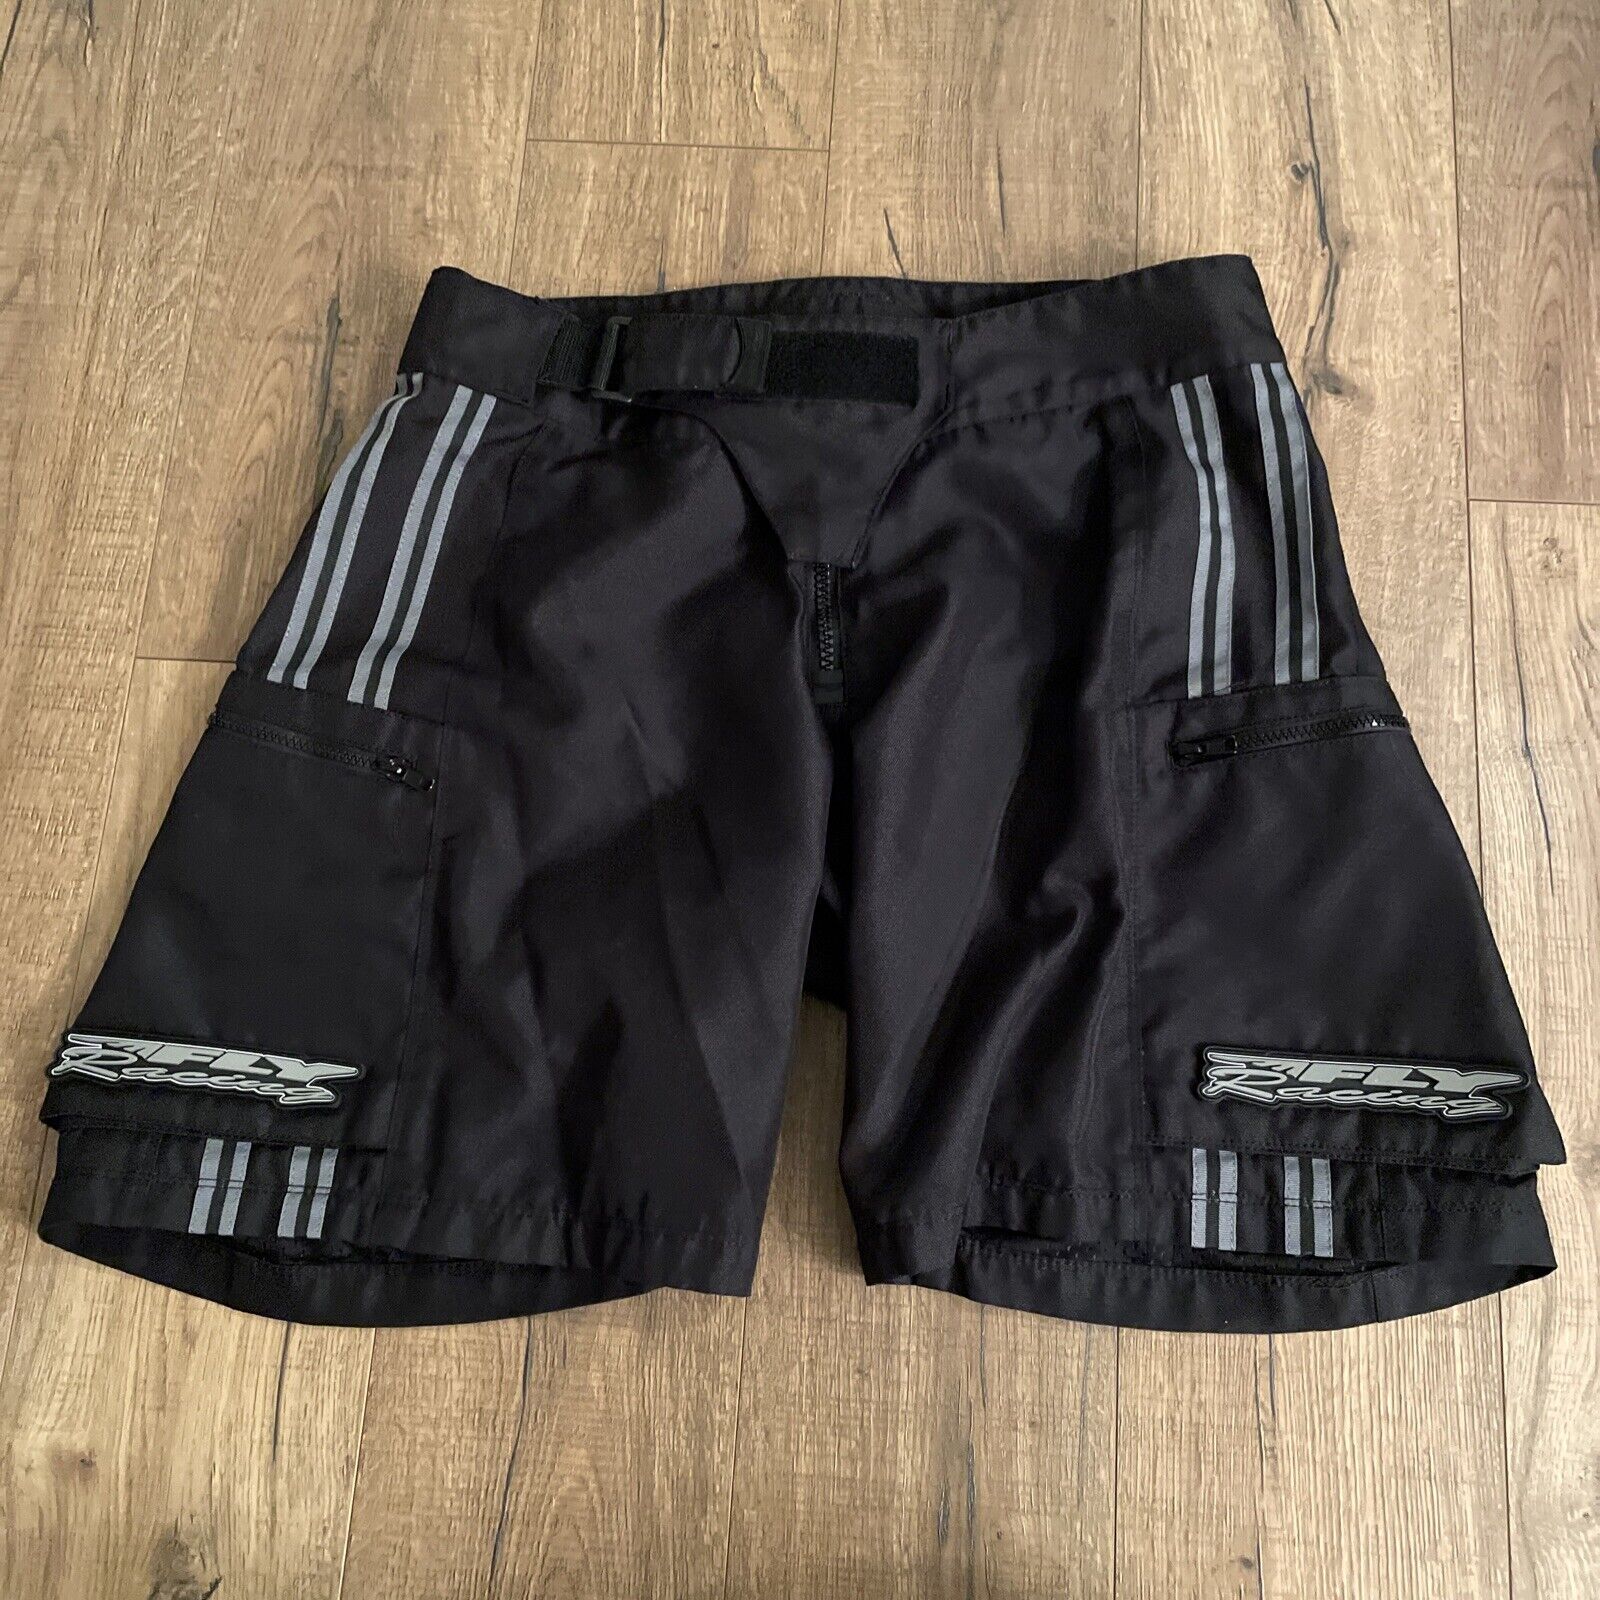 free Fly Racing Shorts Sz Limited time trial price 34 Free Ride Moto Mesh D Multi Lined Pocket